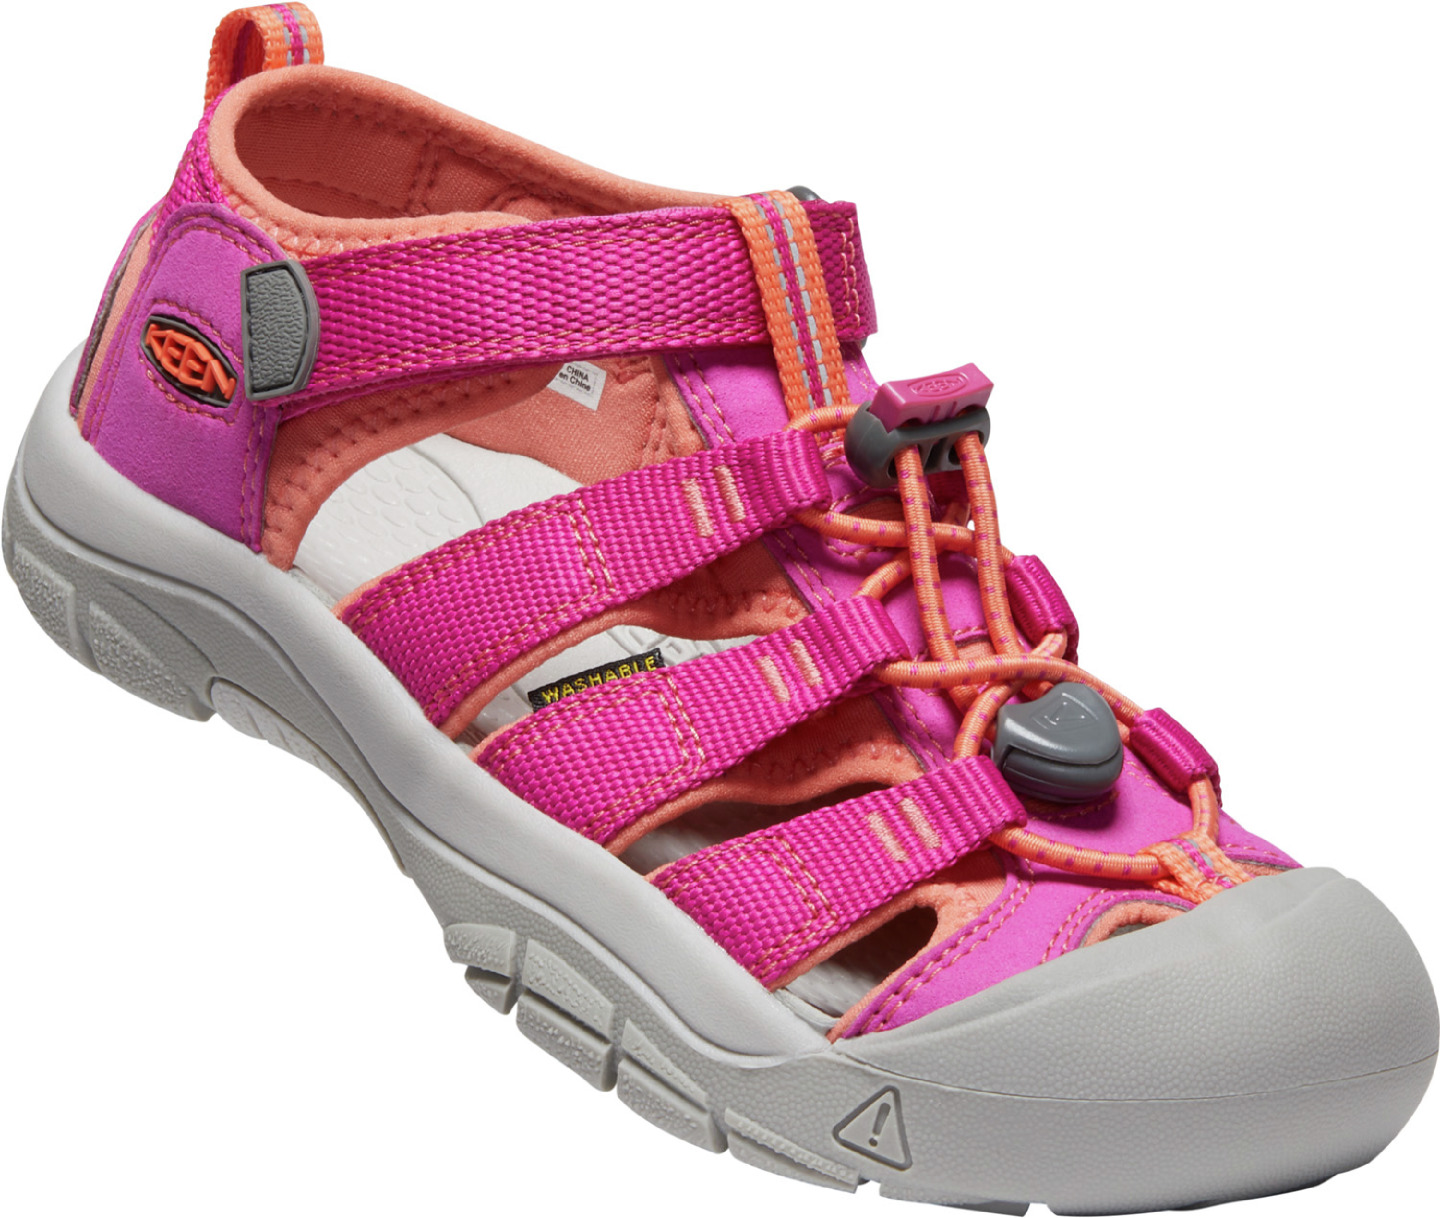 Keen dětské sandály Newport H2 Youth Very Berry/Fusion Coral Barva: very berry/fusion coral, Velikost: 1 UK (34 EU / 21 cm)